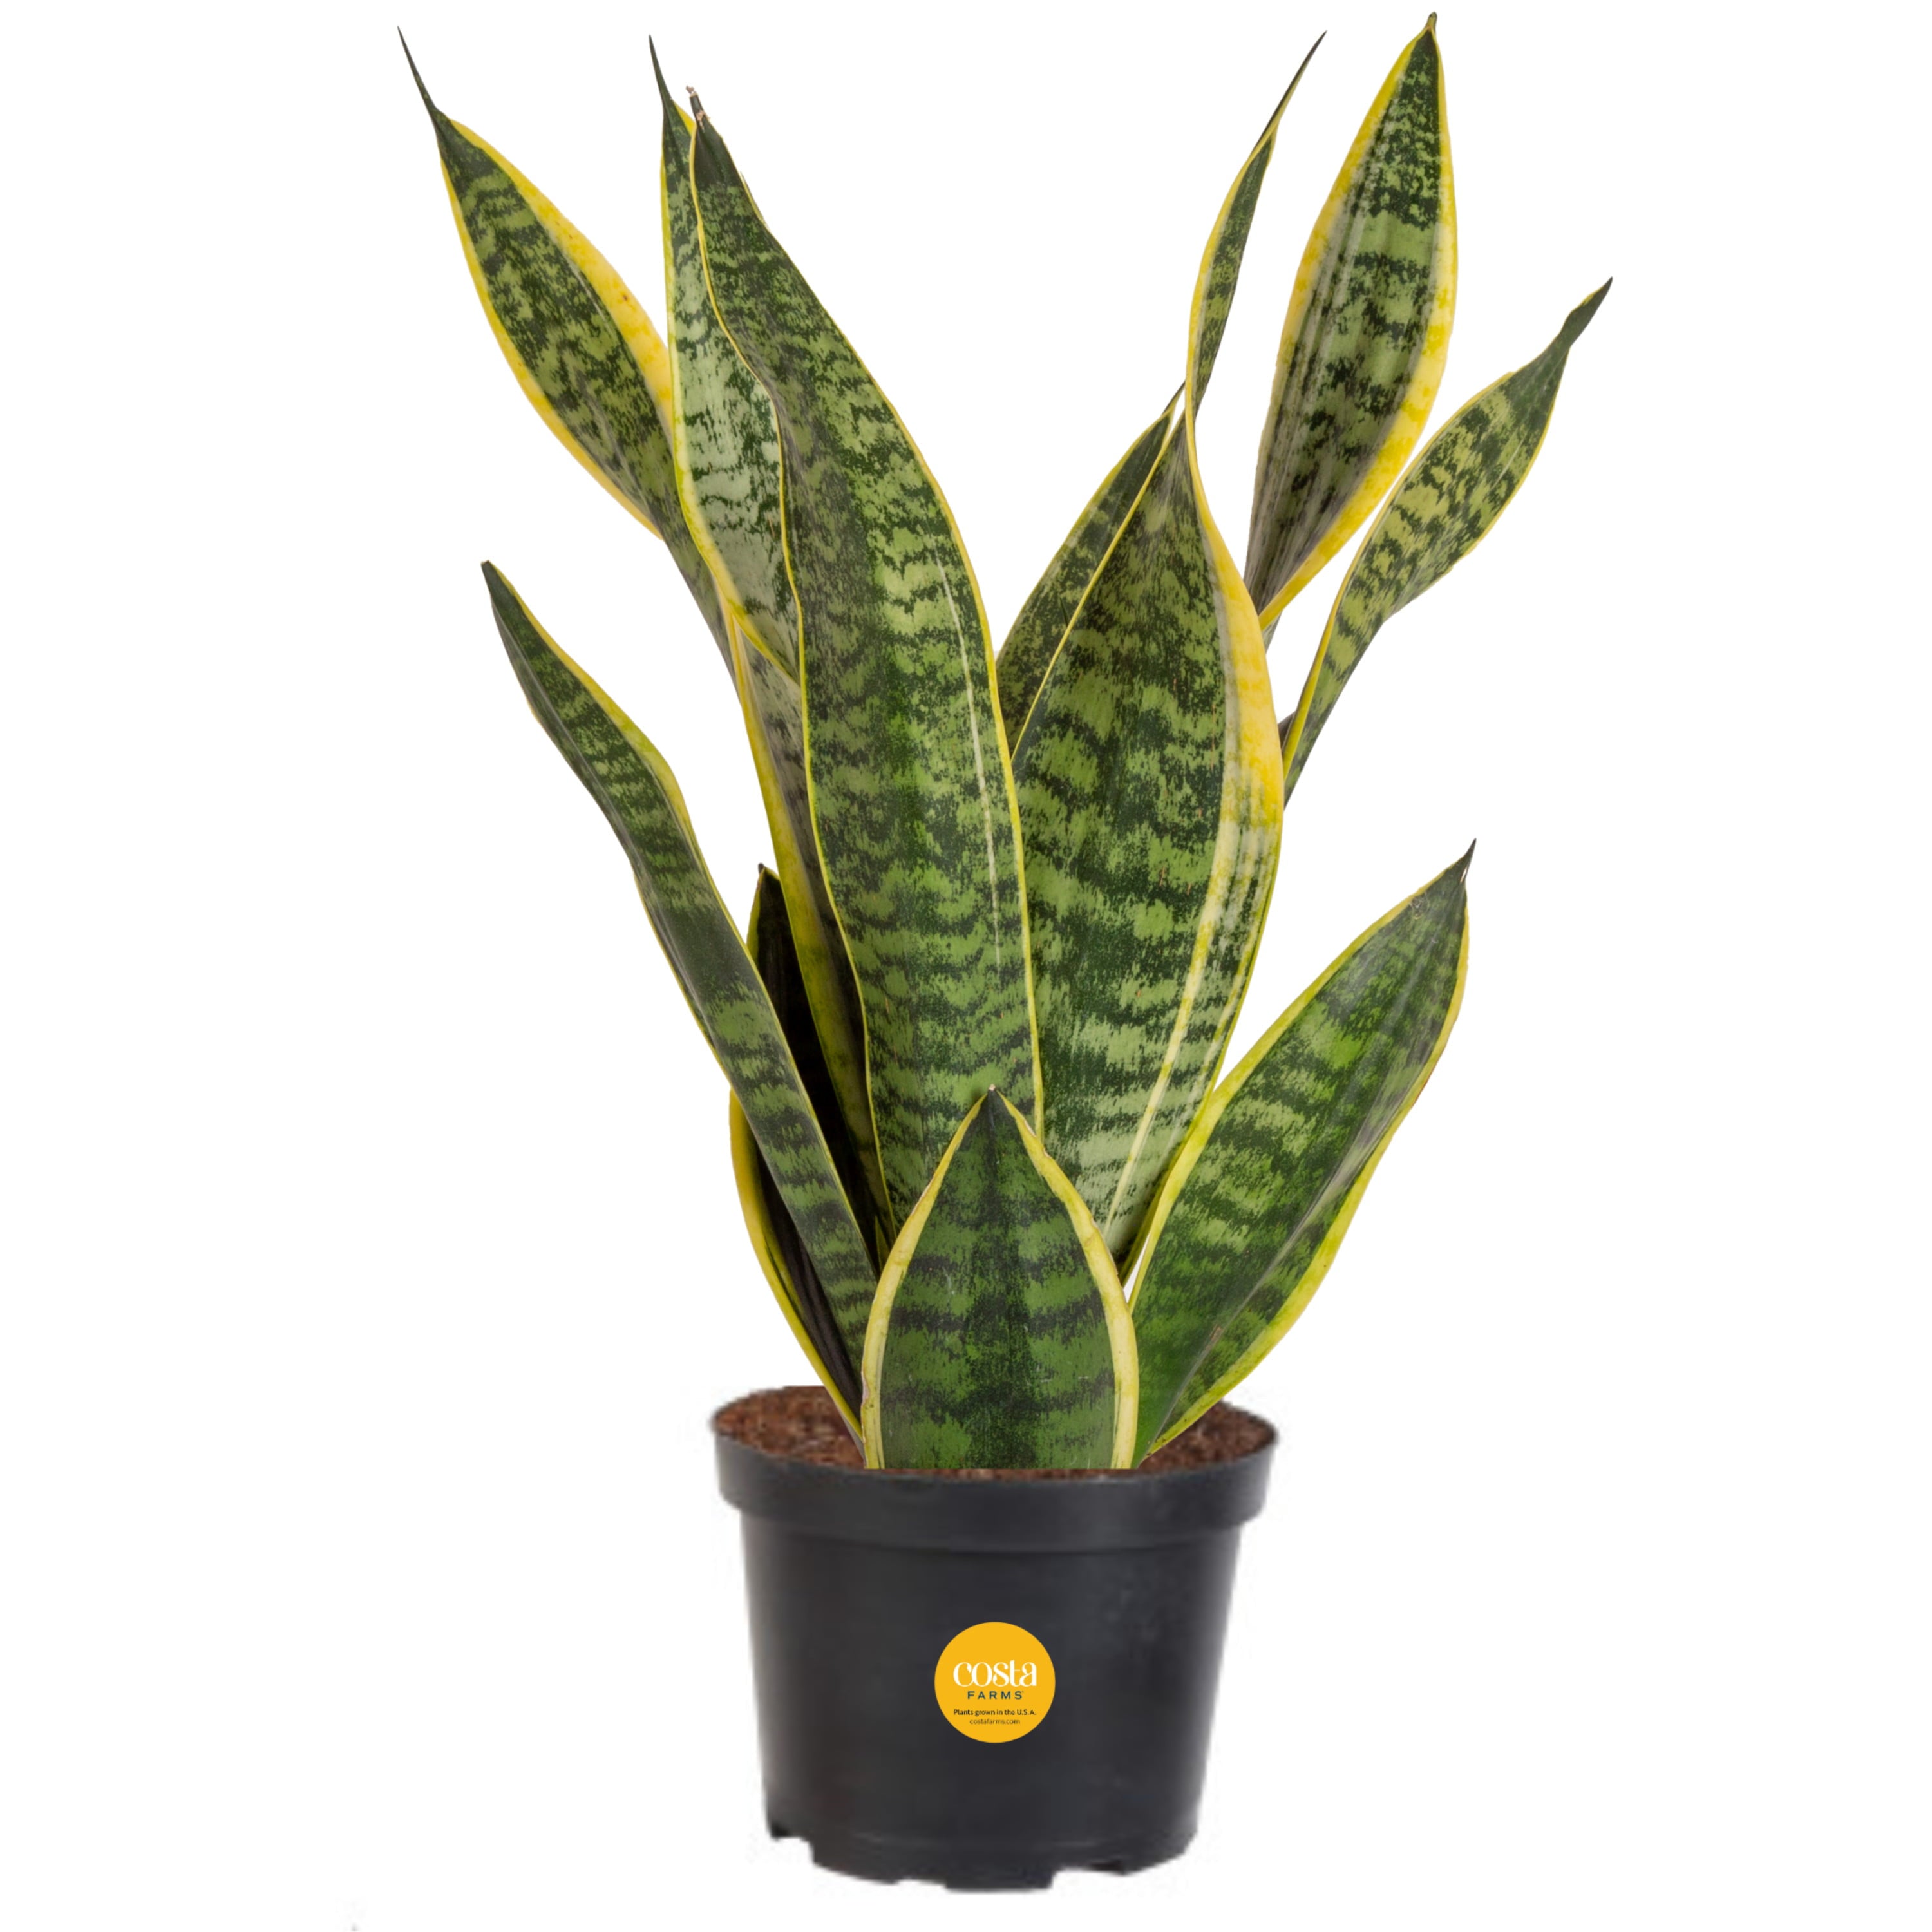 Costa Farms  Live Indoor 14in. Tall Green Snake Plant; Bright， Indirect Sunlight Plant in 6in. Grower Pot